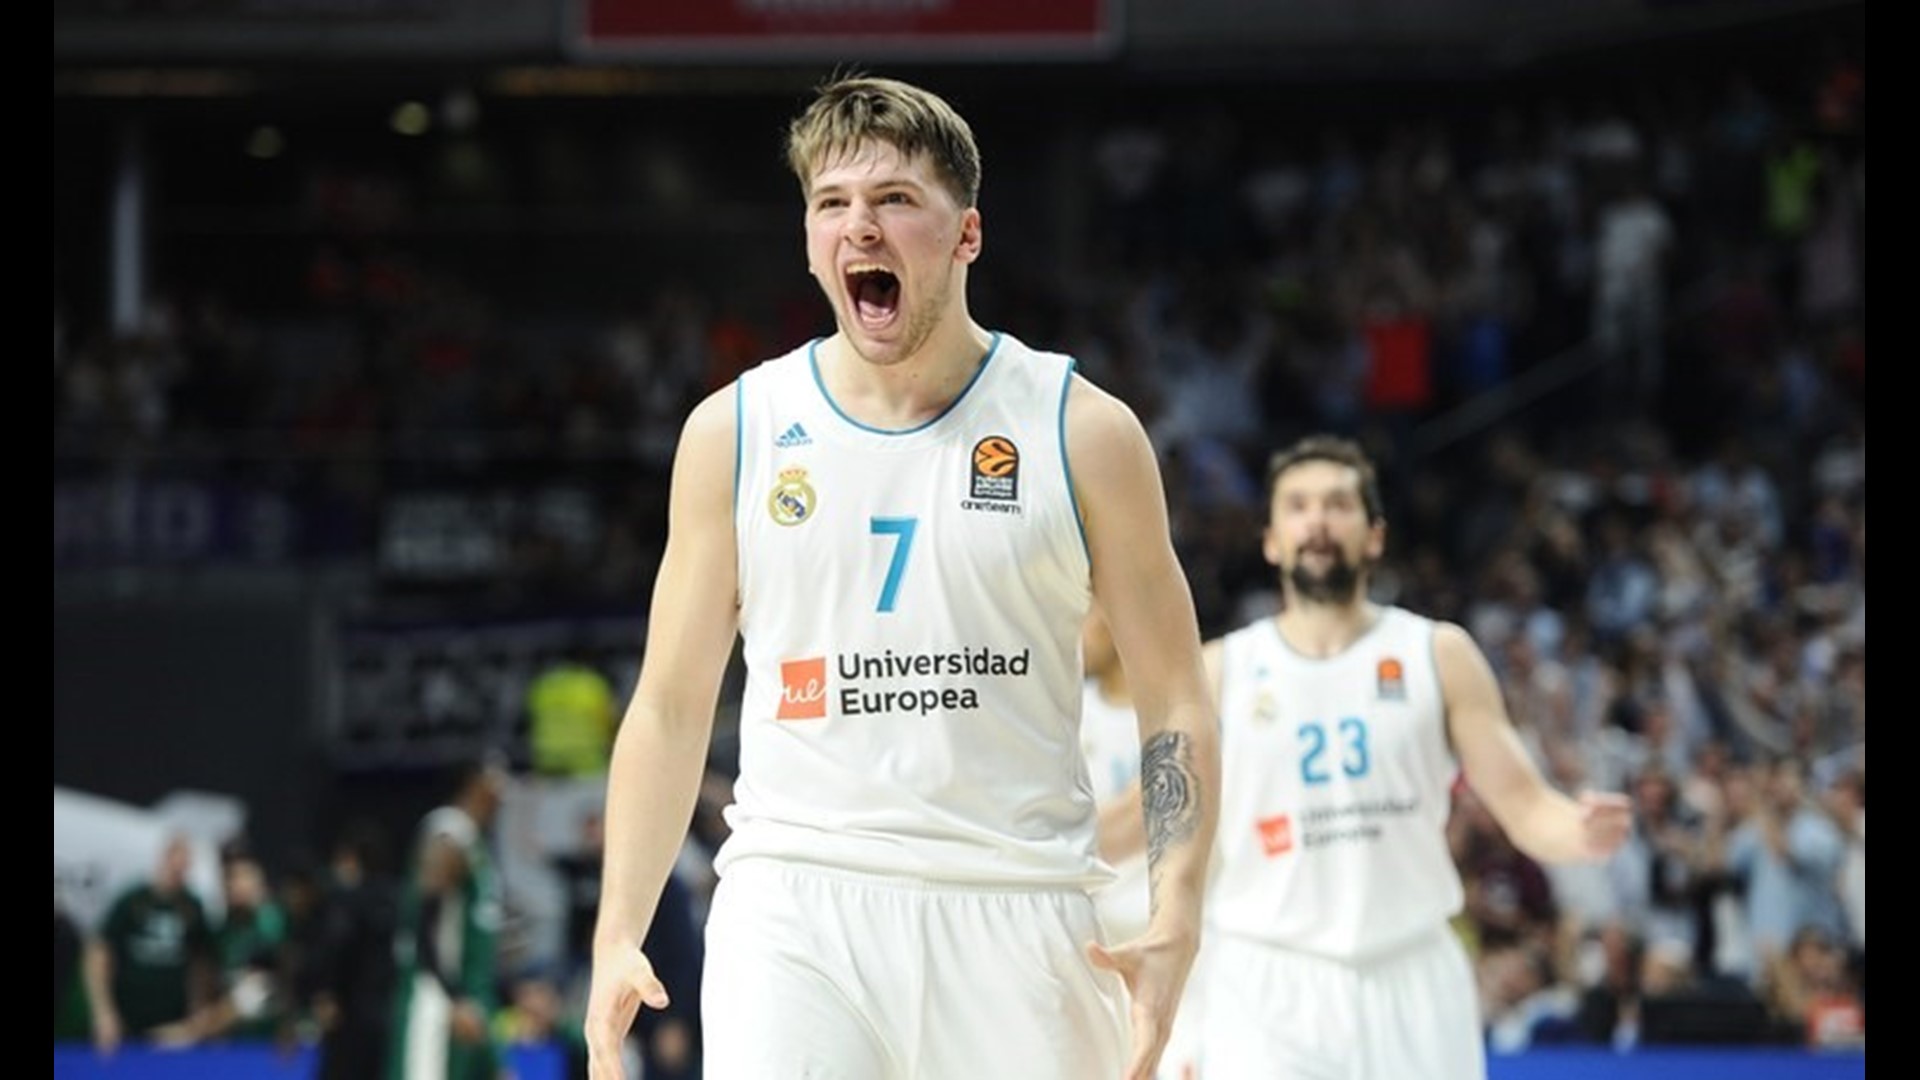 Dallas Mavericks draft pick Luka Doncic is the cornerstone of their future, and he hasn't yet played an NBA game.